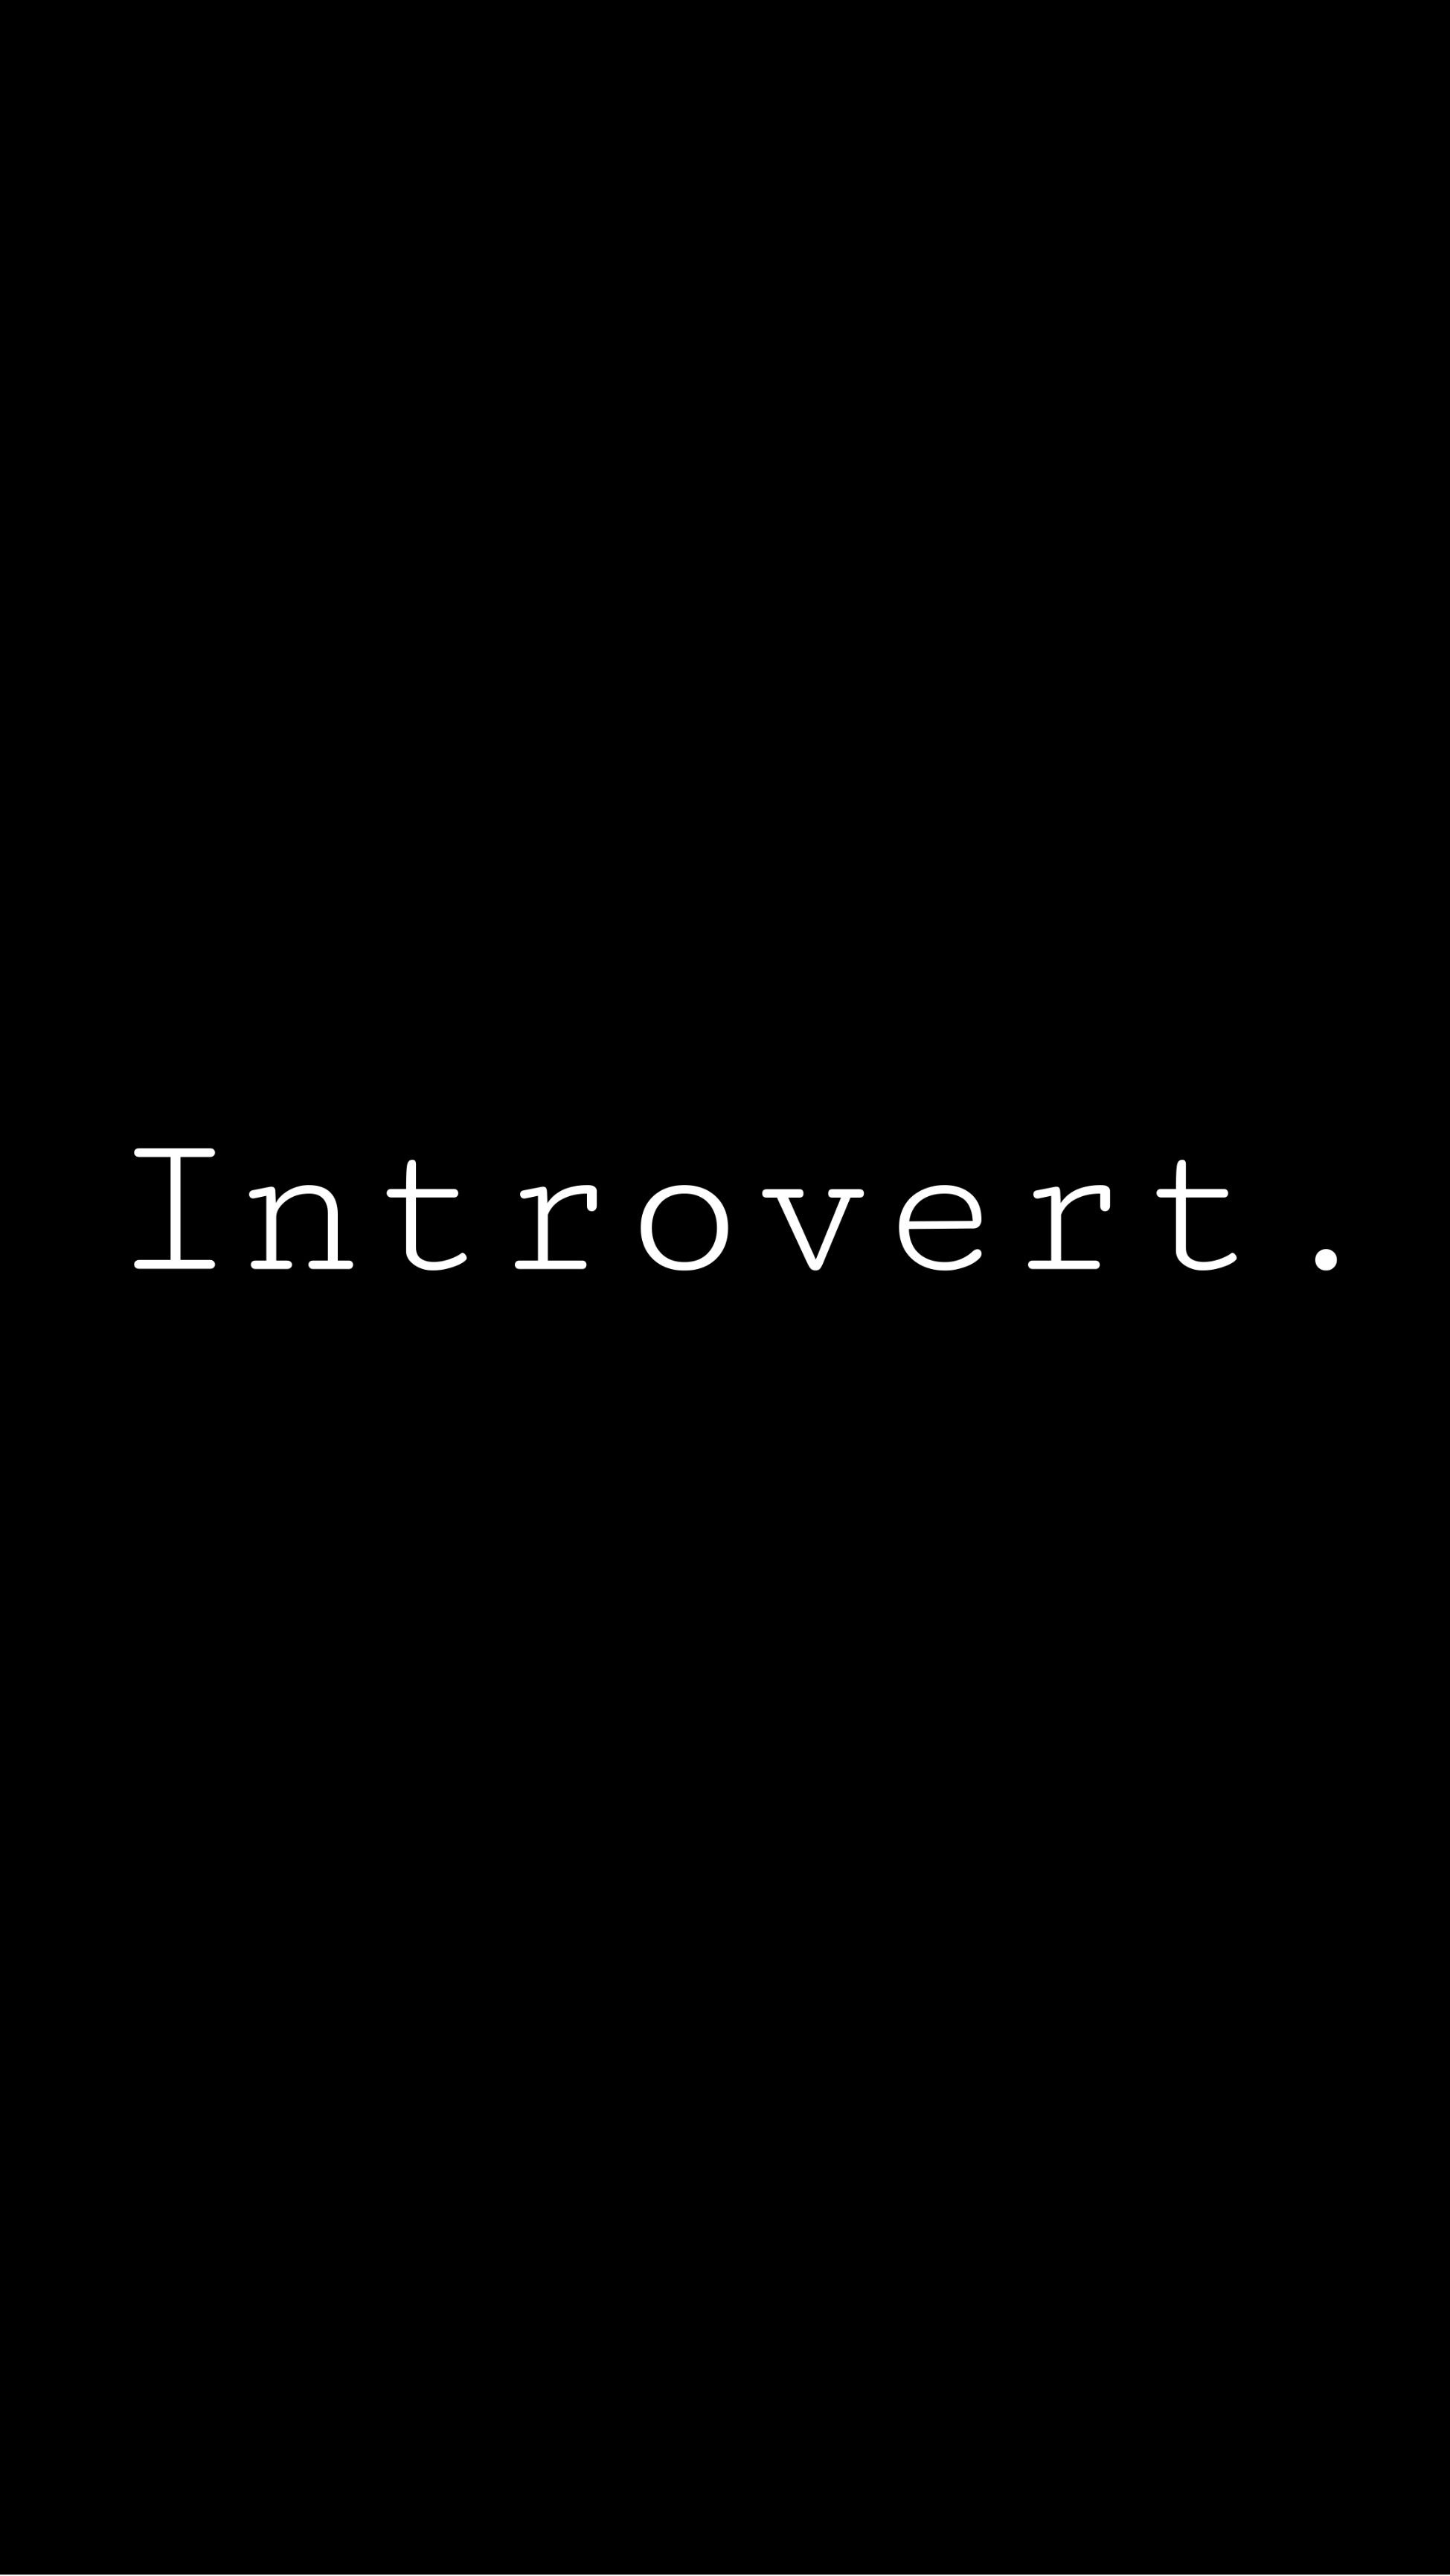 Introvert iPhone Wallpaper Free Introvert iPhone Background